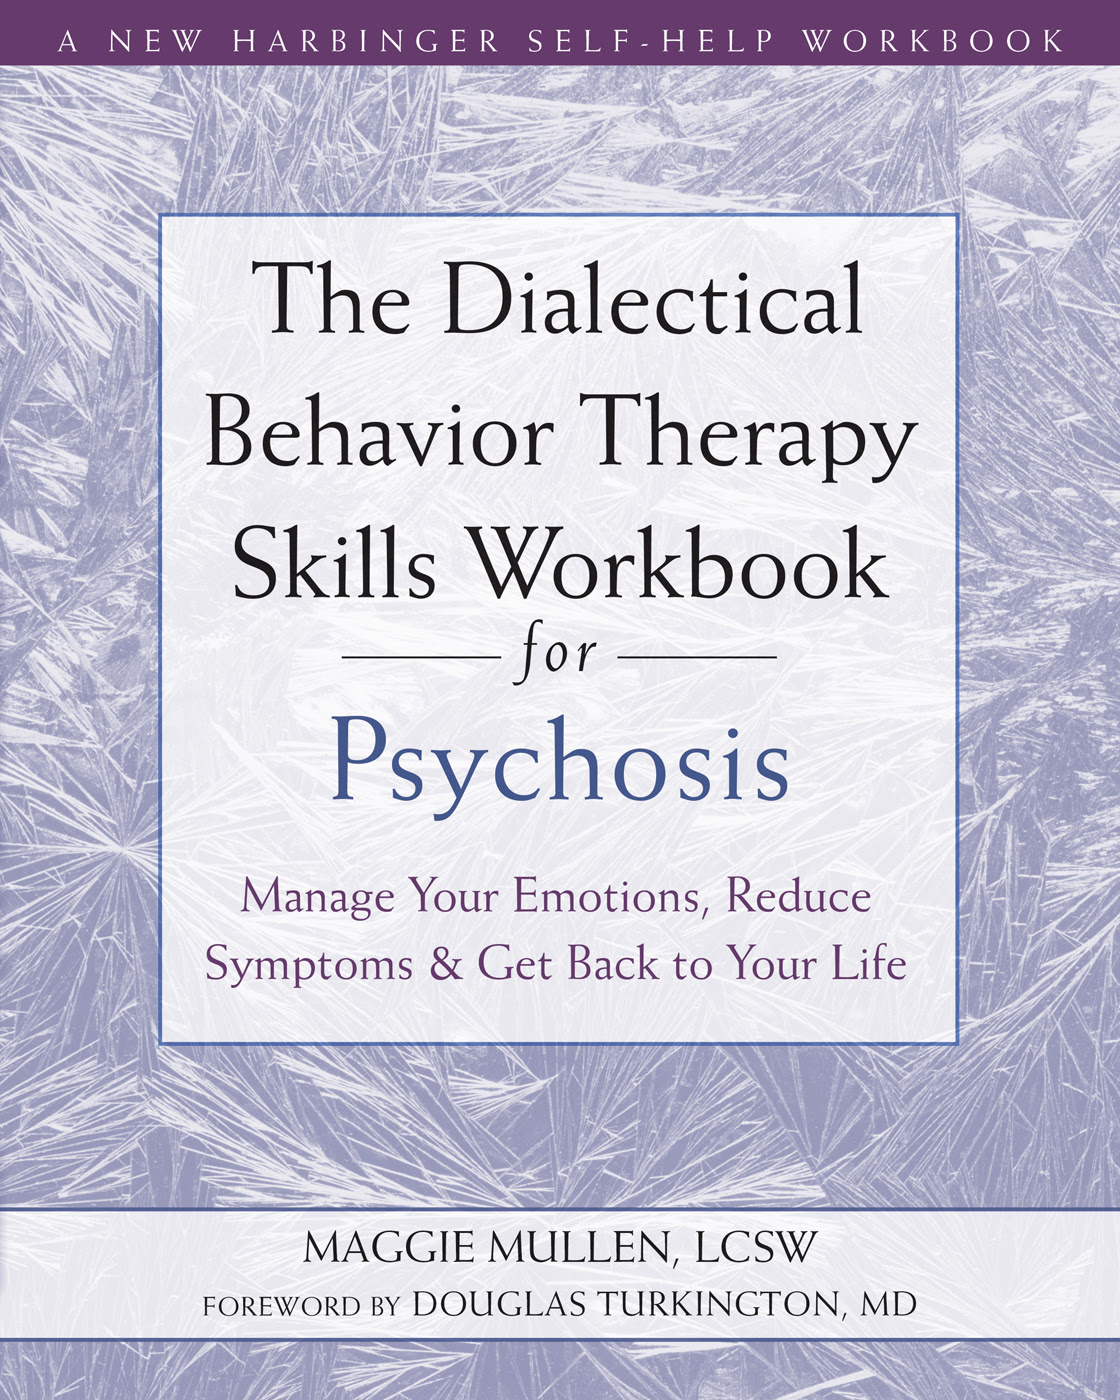 pdf download The Dialectical Behavior Therapy Skills Workbook for Psychosis: Manage Your Emotions, Reduce Symptoms, and Get Back to Your Life